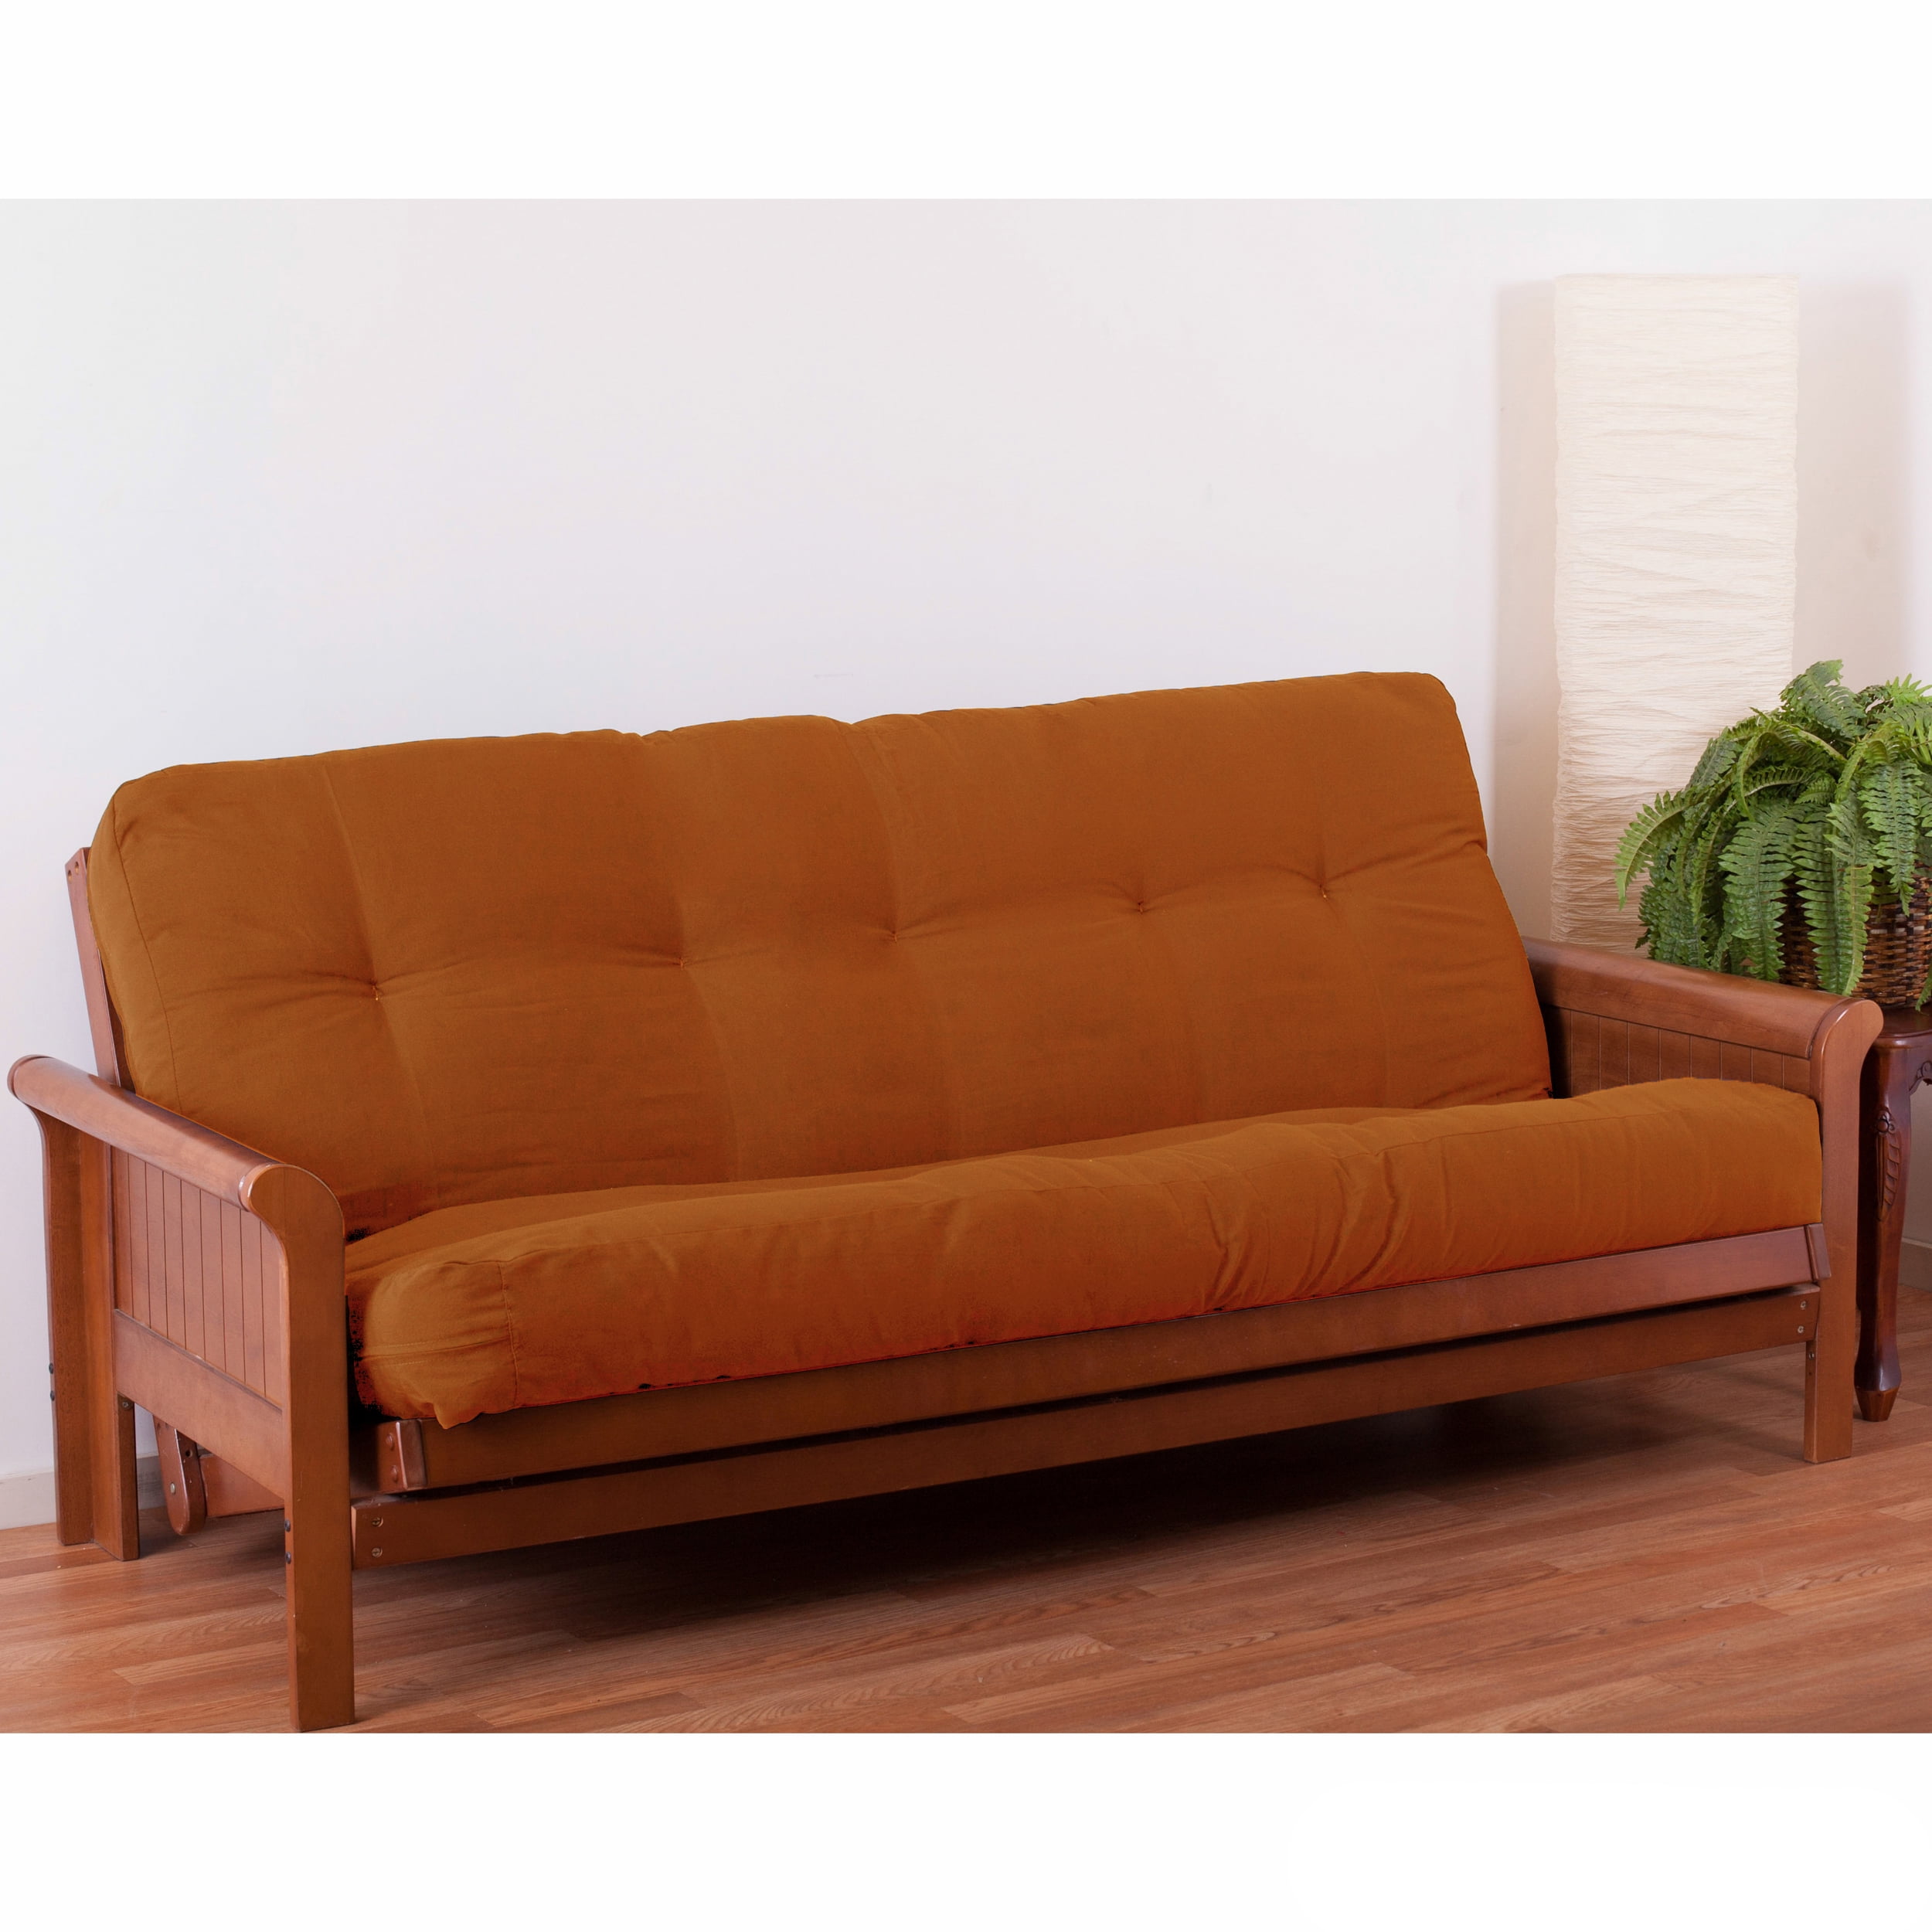 Picture of Blazing Needles 9606-B-TW-SP 7 in. Renewal Twill Full Size Futon Mattress, Spice